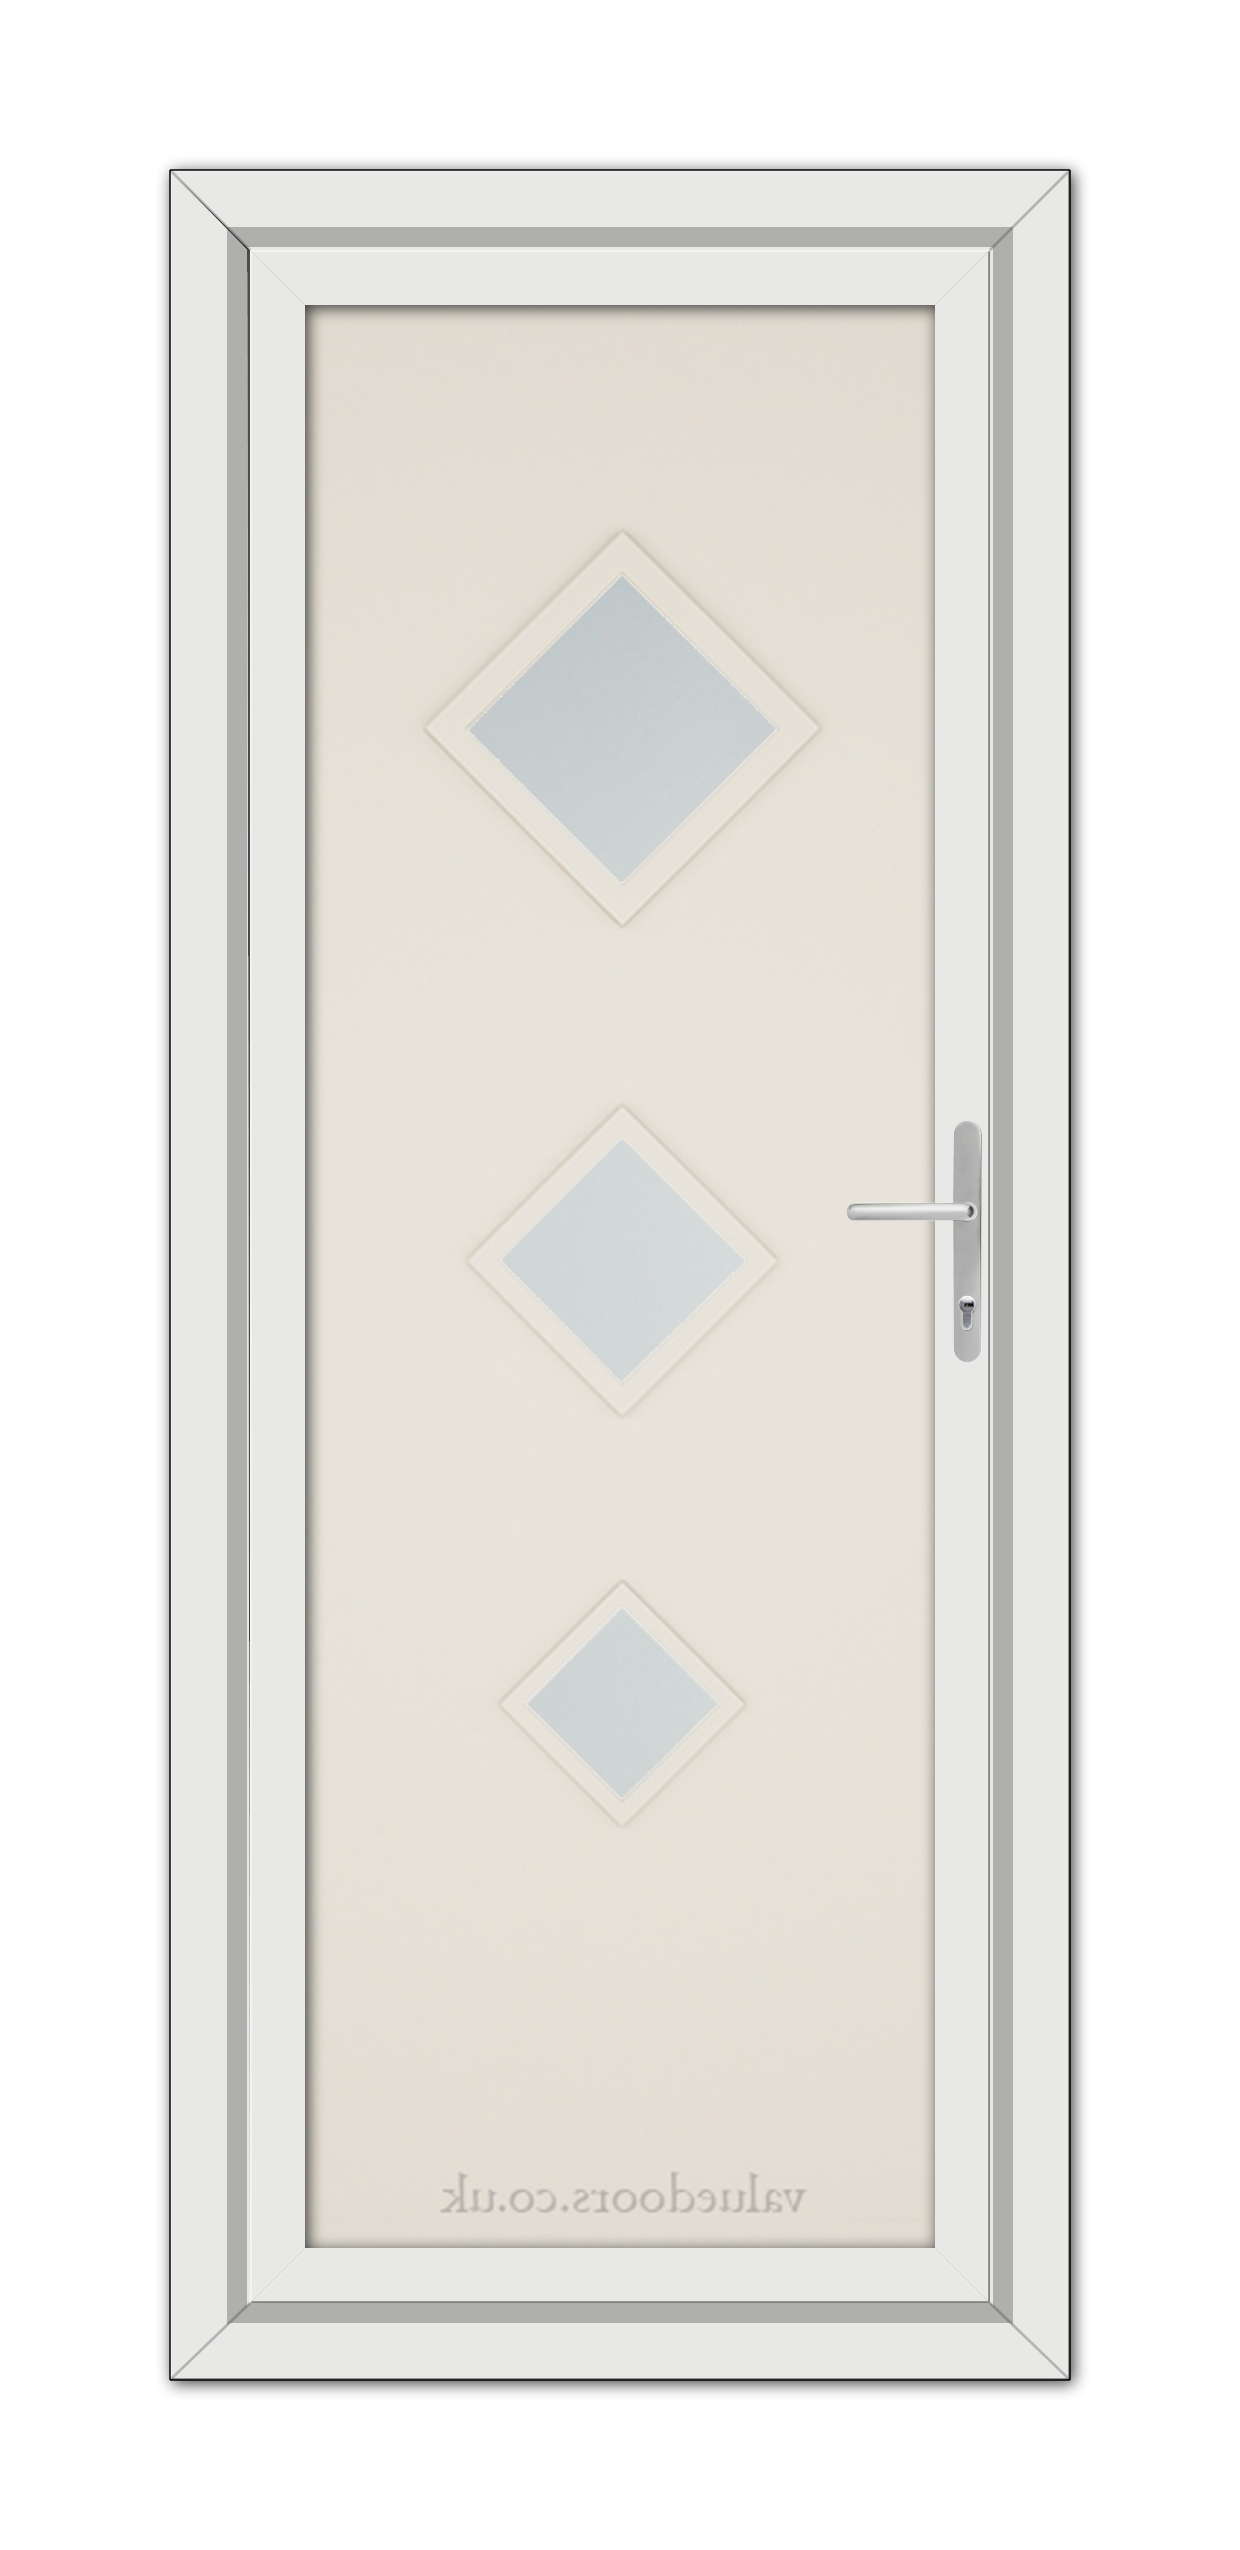 A vertical image of a closed Cream Modern 5123 uPVC Door with three diamond-shaped windows and a metallic handle, viewed from the front.